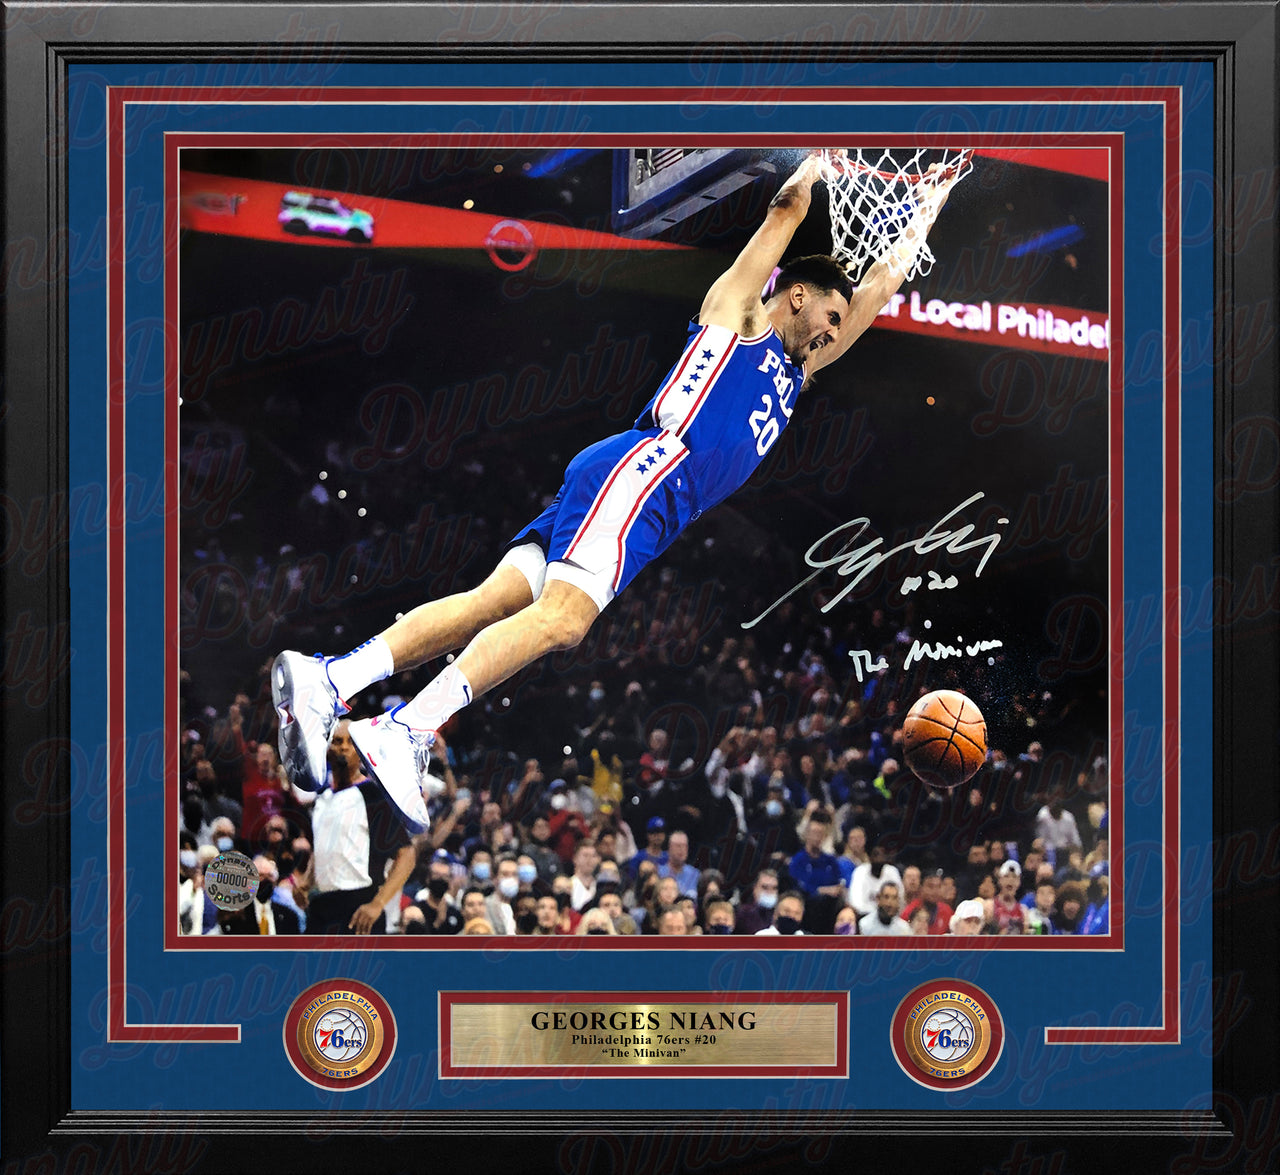 Georges Niang in Action Philadelphia 76ers Autographed Framed Basketball Photo - Dynasty Sports & Framing 